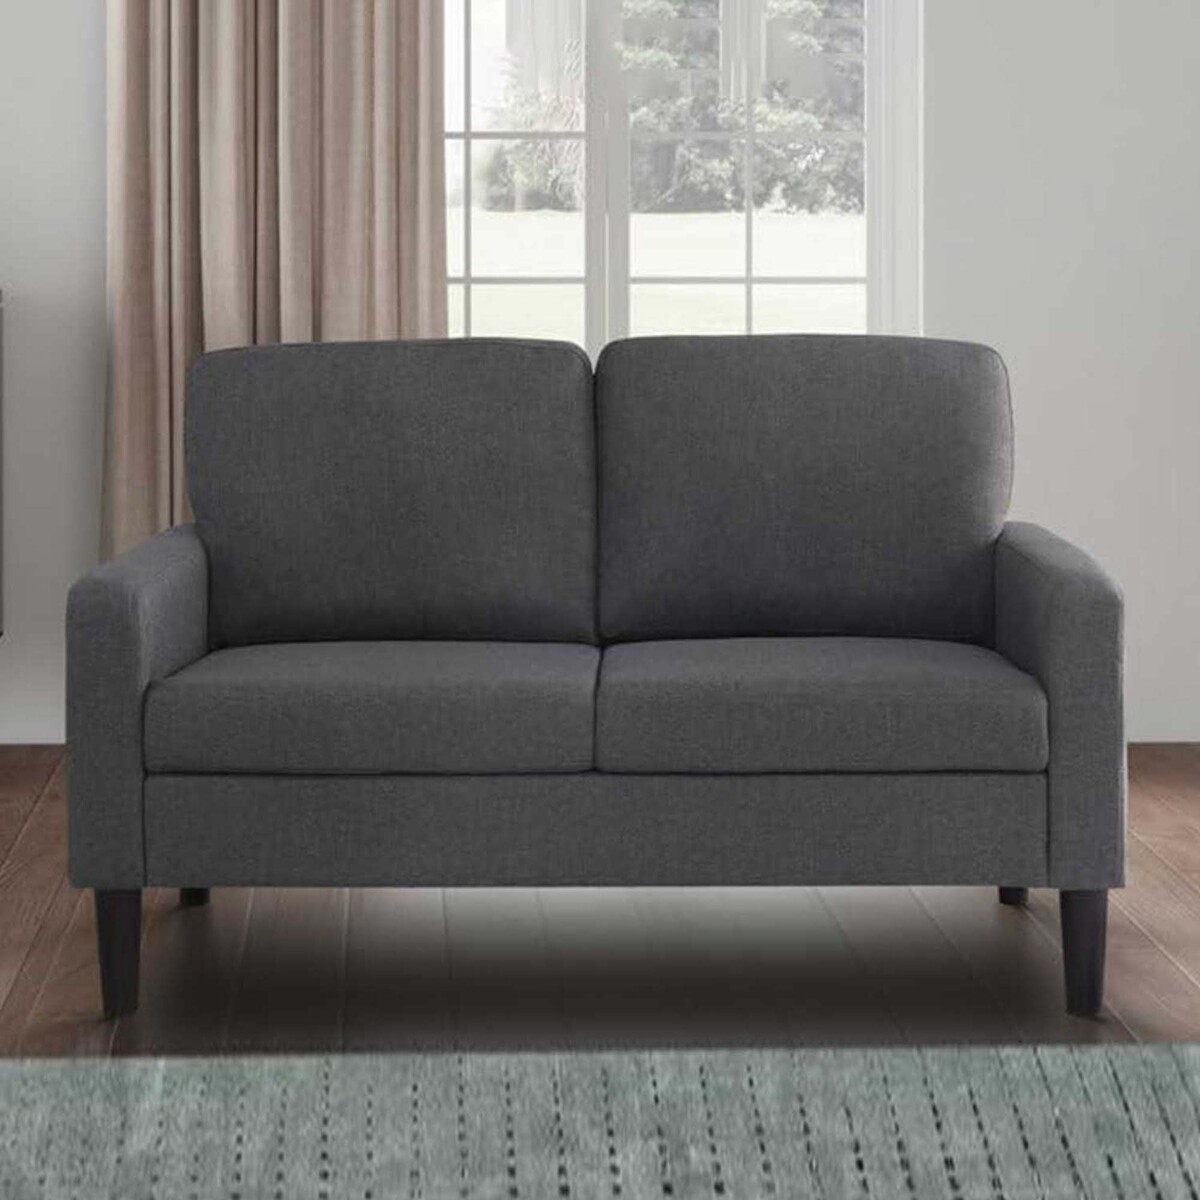 Imperial Majestic, Dark Grey 2-Seater Fabric Sofa -armrest and backrest for support and comfort, Comfy Small Sofas for Bedroom